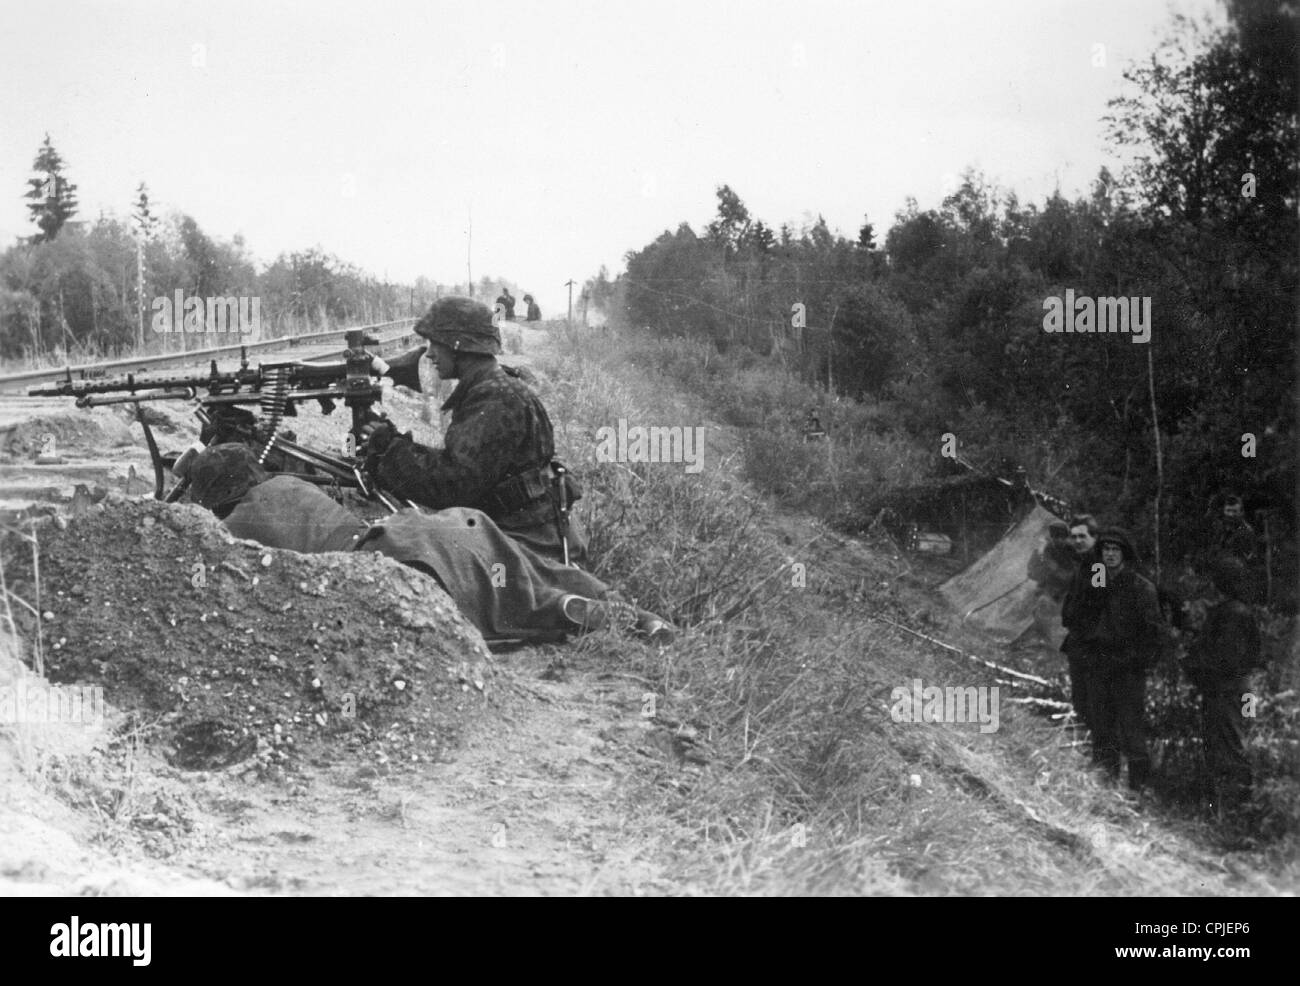 Soldiers of the Waffen-SS on the Eastern front, 1942 Stock Photo